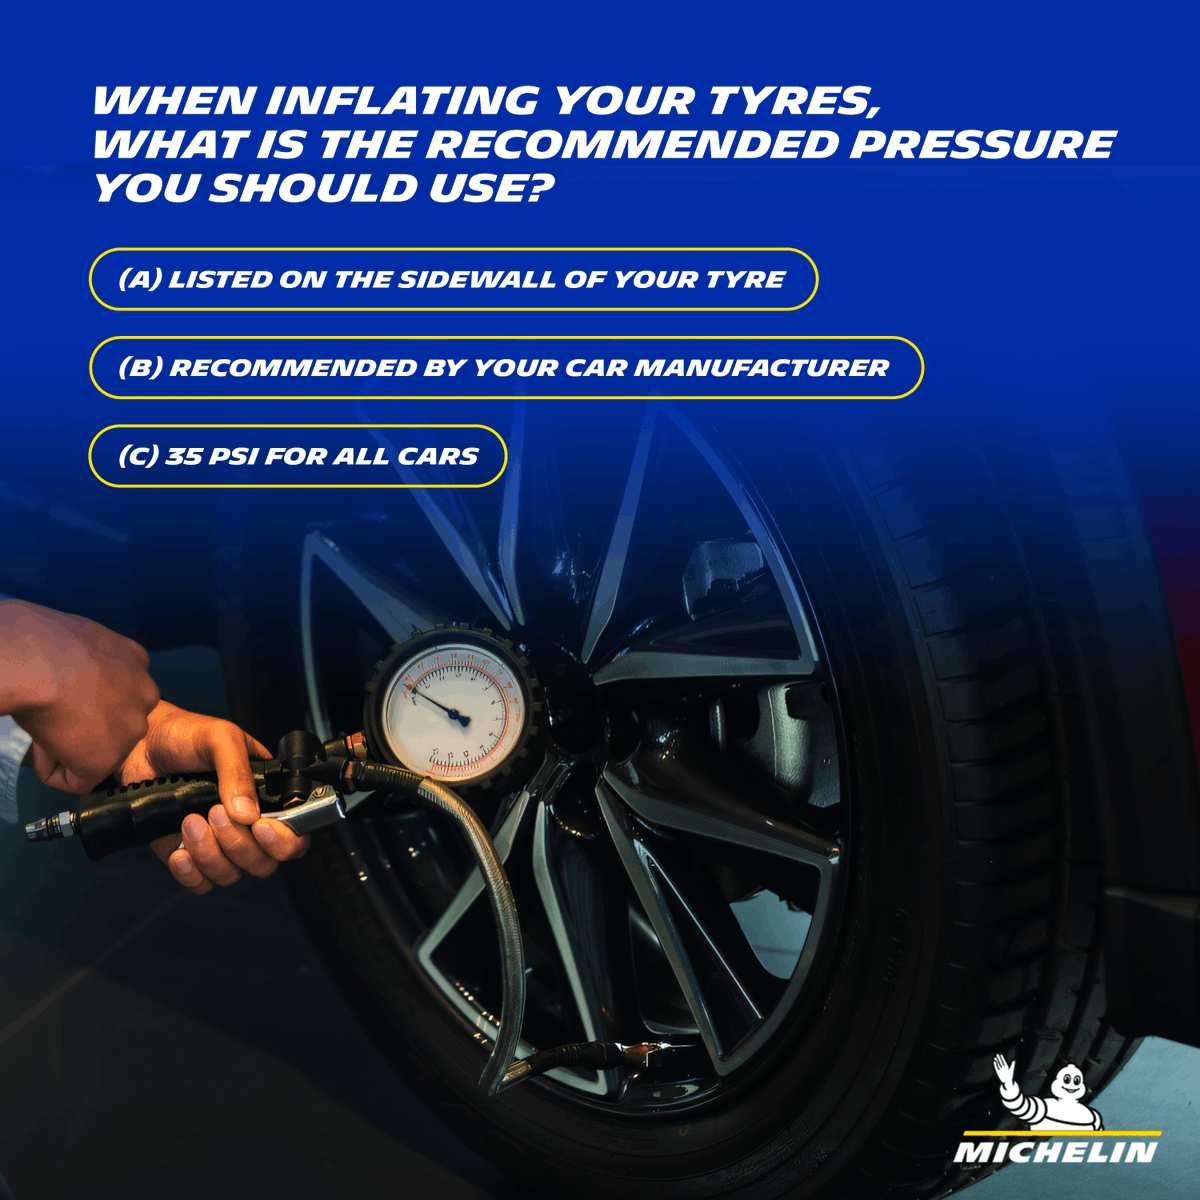 Pump it Up Right. What's the correct pressure for your tyres? Comment your answers below. #MichelinQuiz #MichelinIndia #TyreKnowledge